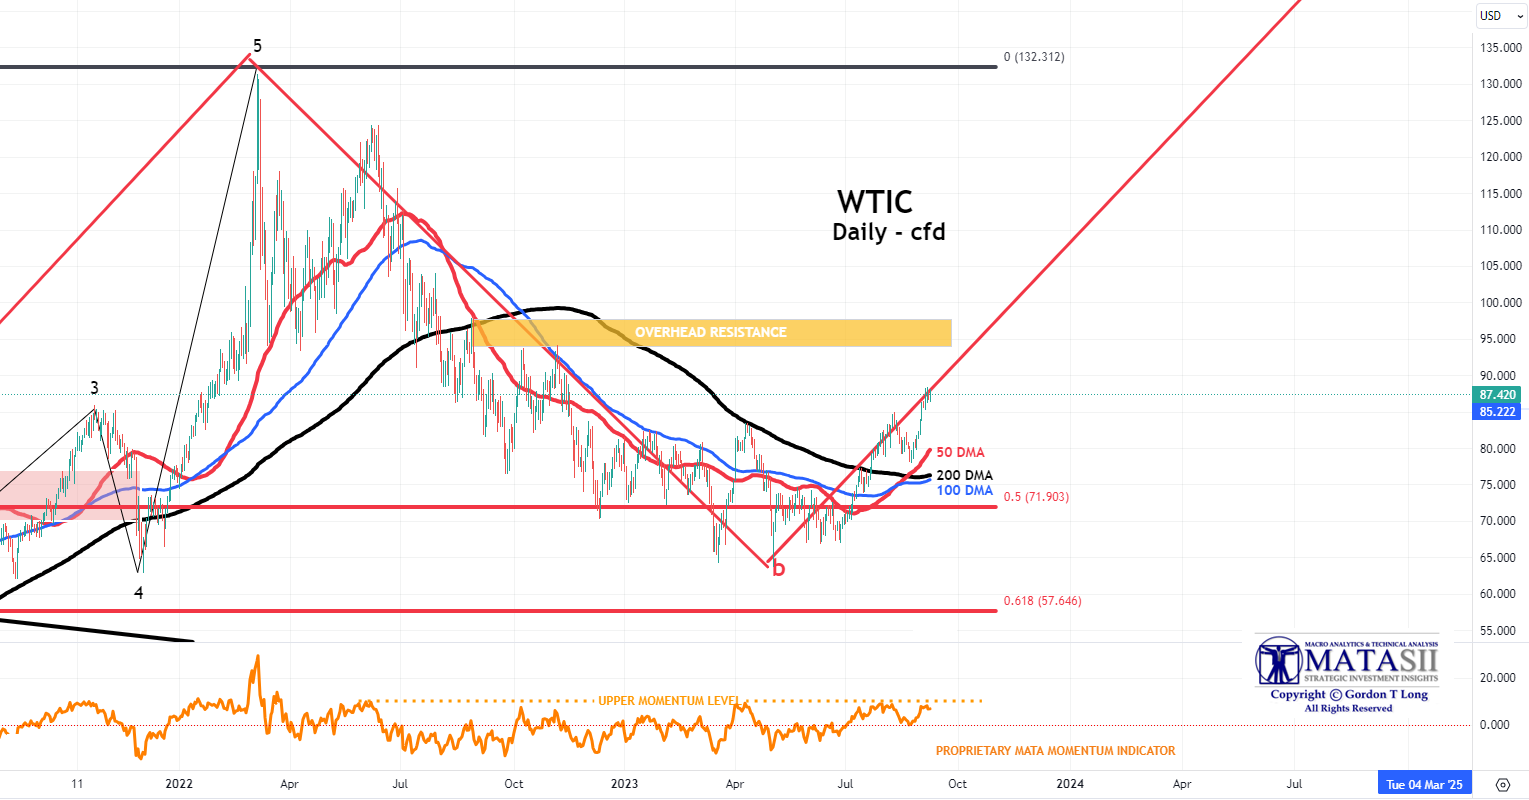 LONGWave-09-06-23-SEPTEMBER-Why-Are-Central-Banks-Buying-Gold-Newsletter-2-WTIC-Daily image